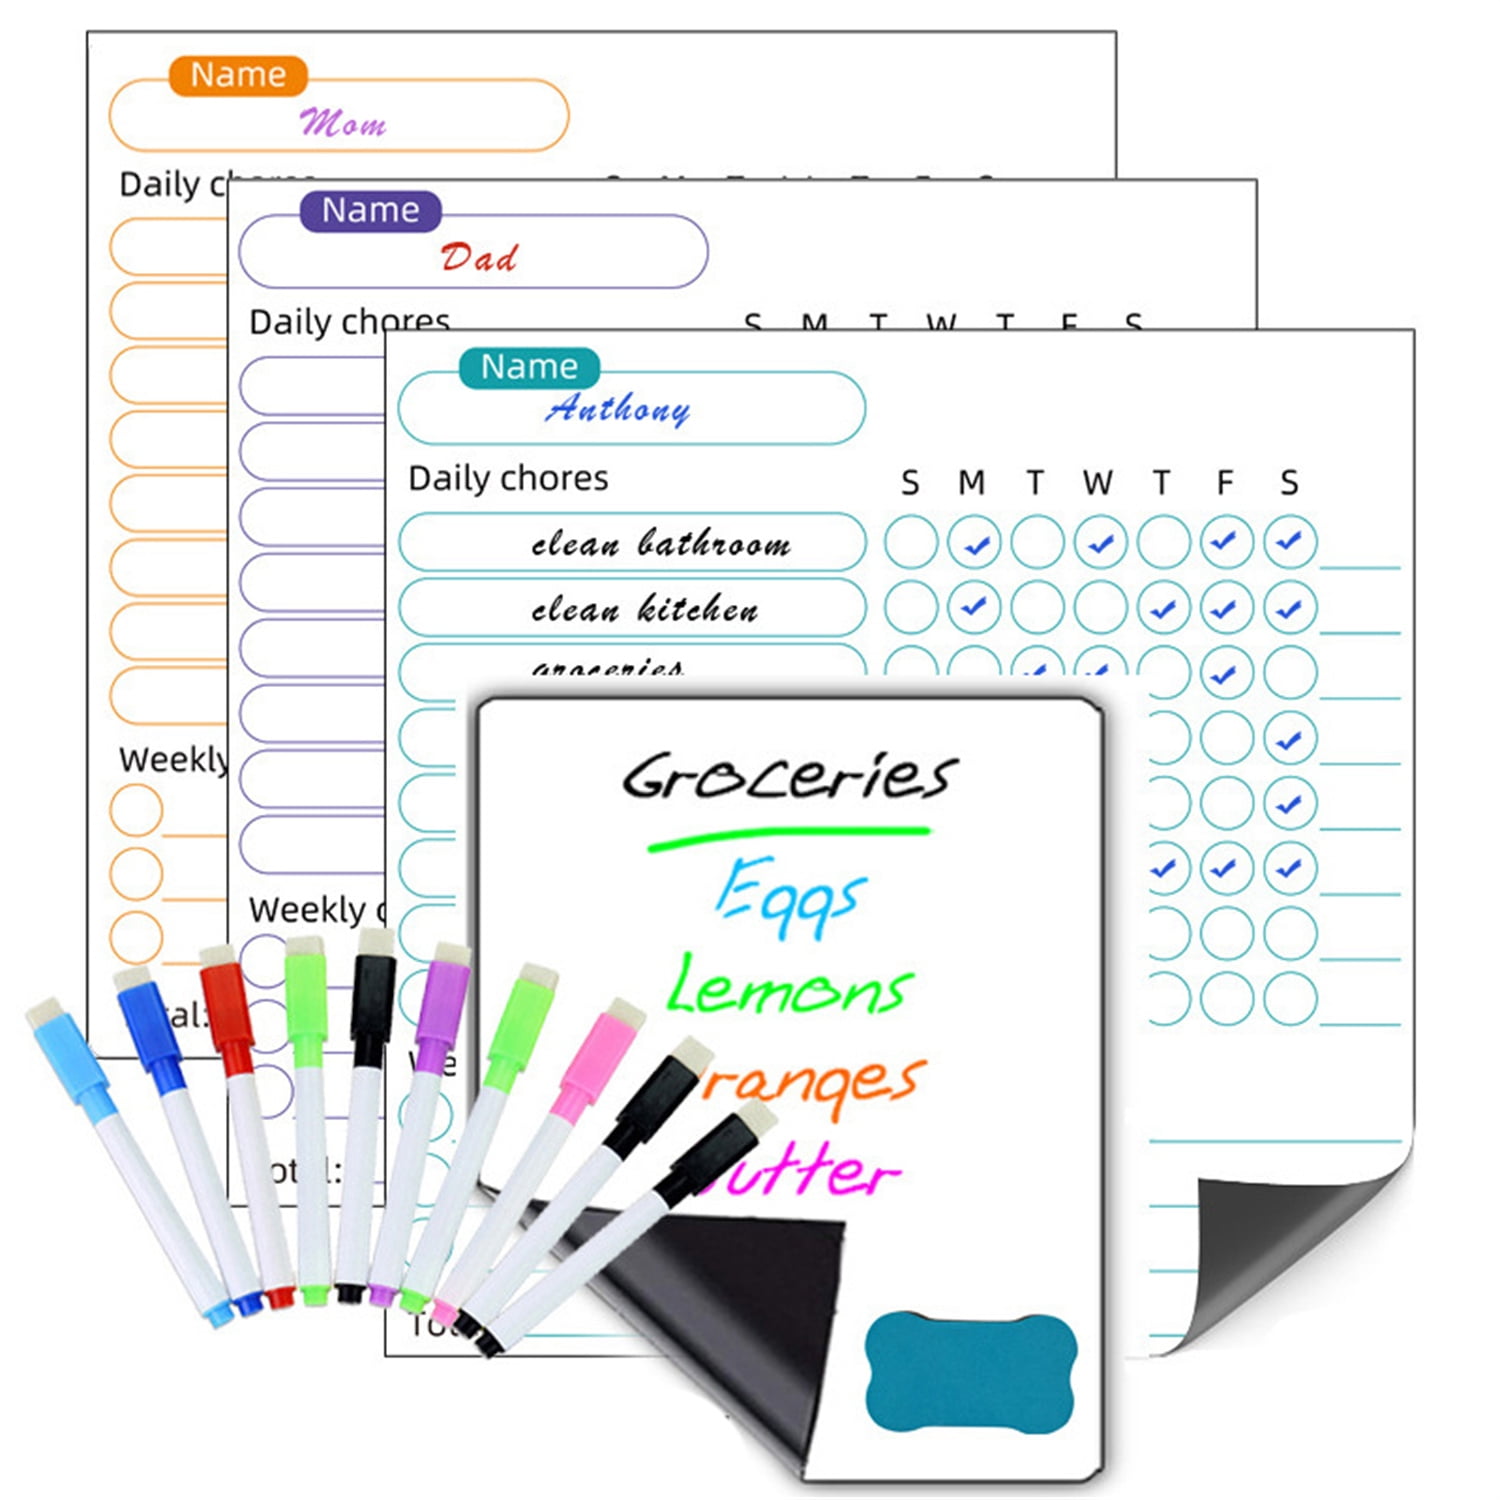 Kids Chore Chart BUNDLE - 'My Chore Chart' Weekly Page in 5 Colors -  Printable